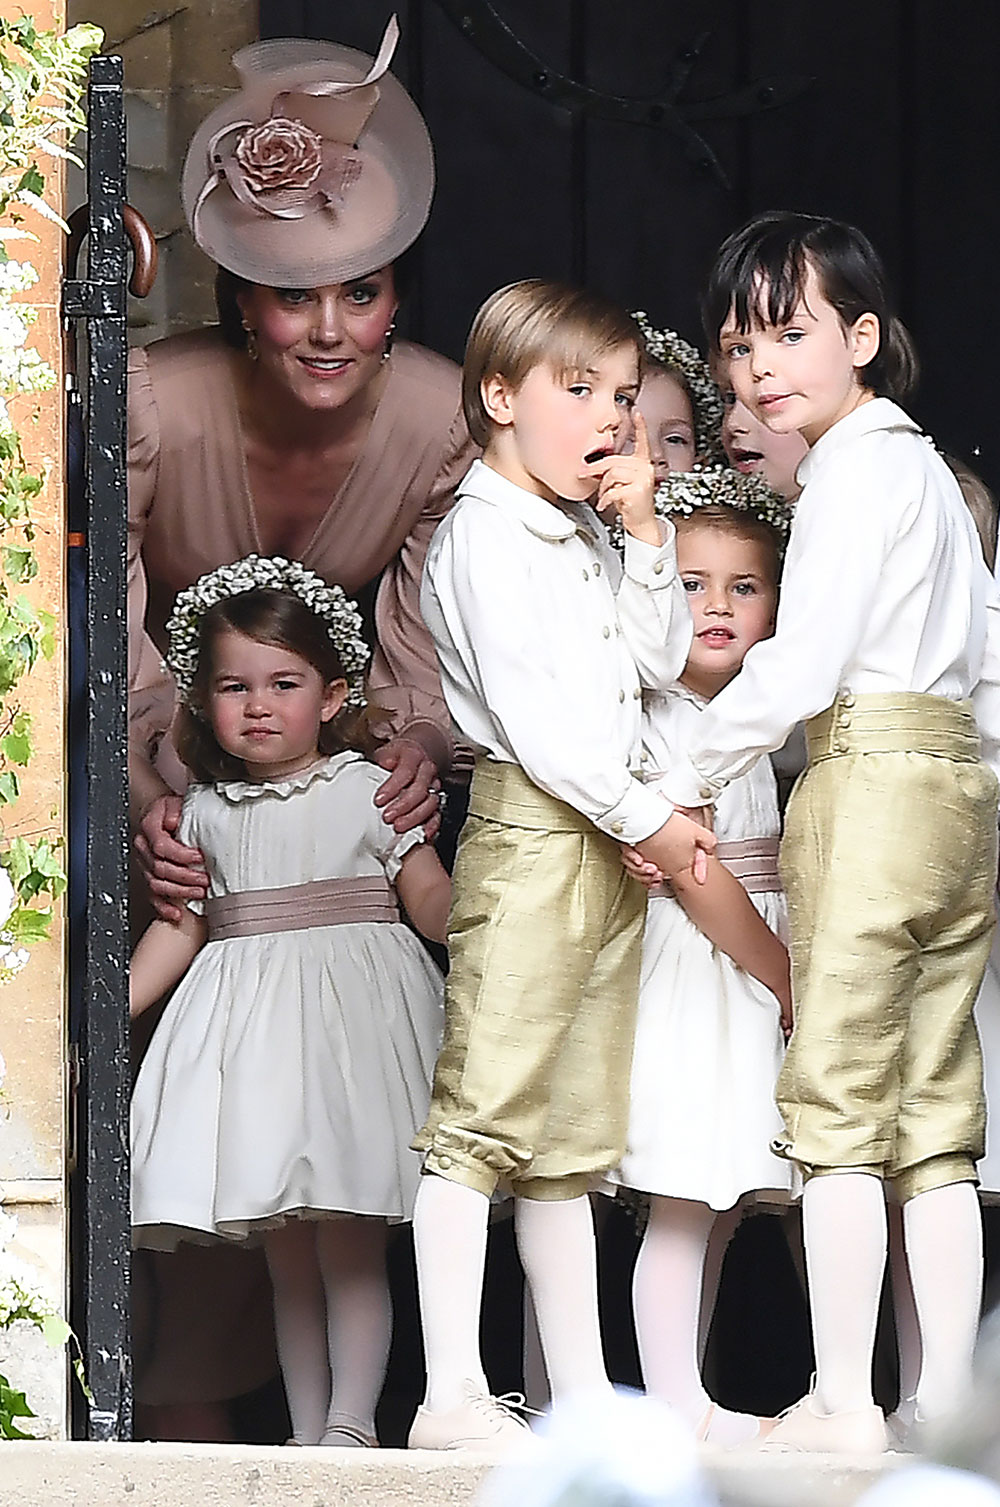 The Duchess of Cambridge leads the flower girls and page boys, including her own children Prince George and Princess Charlotte, into the church.